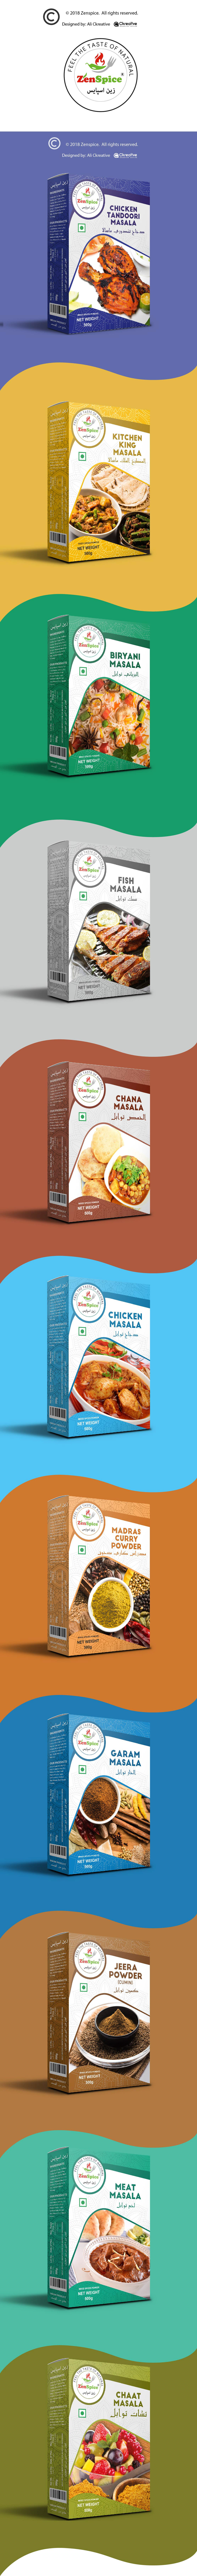 Packaging zenspice branding  identity mockups colors graphics Food  spices hotel